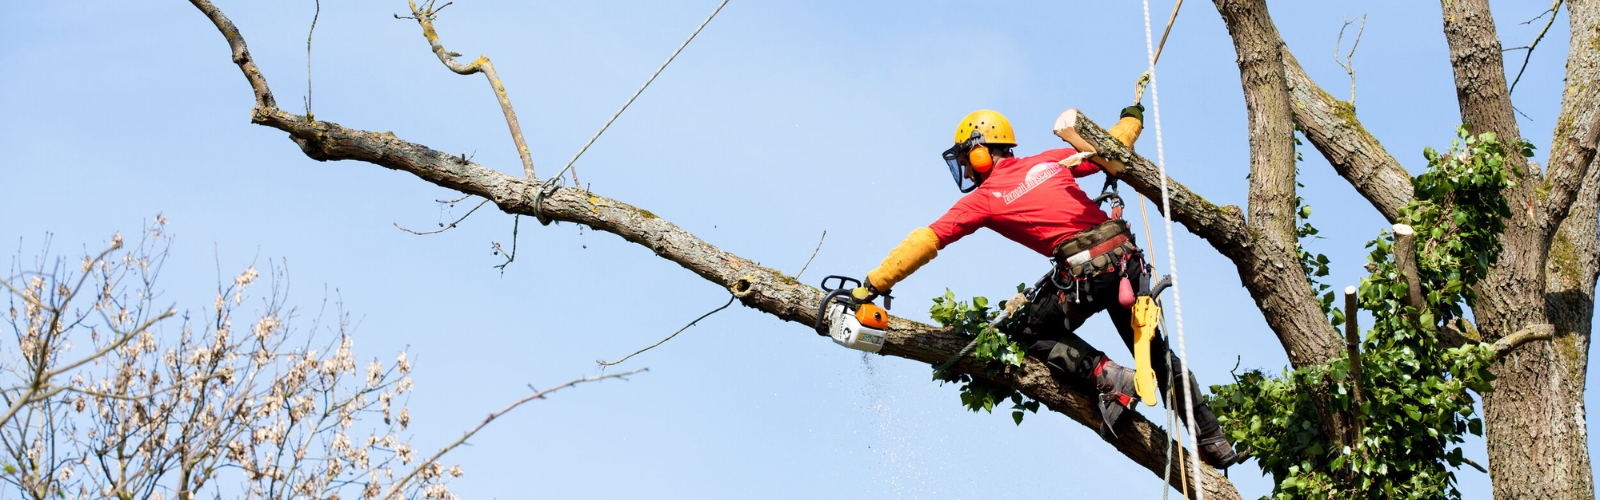 A tree worker from a Tree Service in Prescott, decked out in protective gear including a helmet and harness, uses a chainsaw to cut a high tree branch. The sky is clear, and bare branches can be seen in the background.